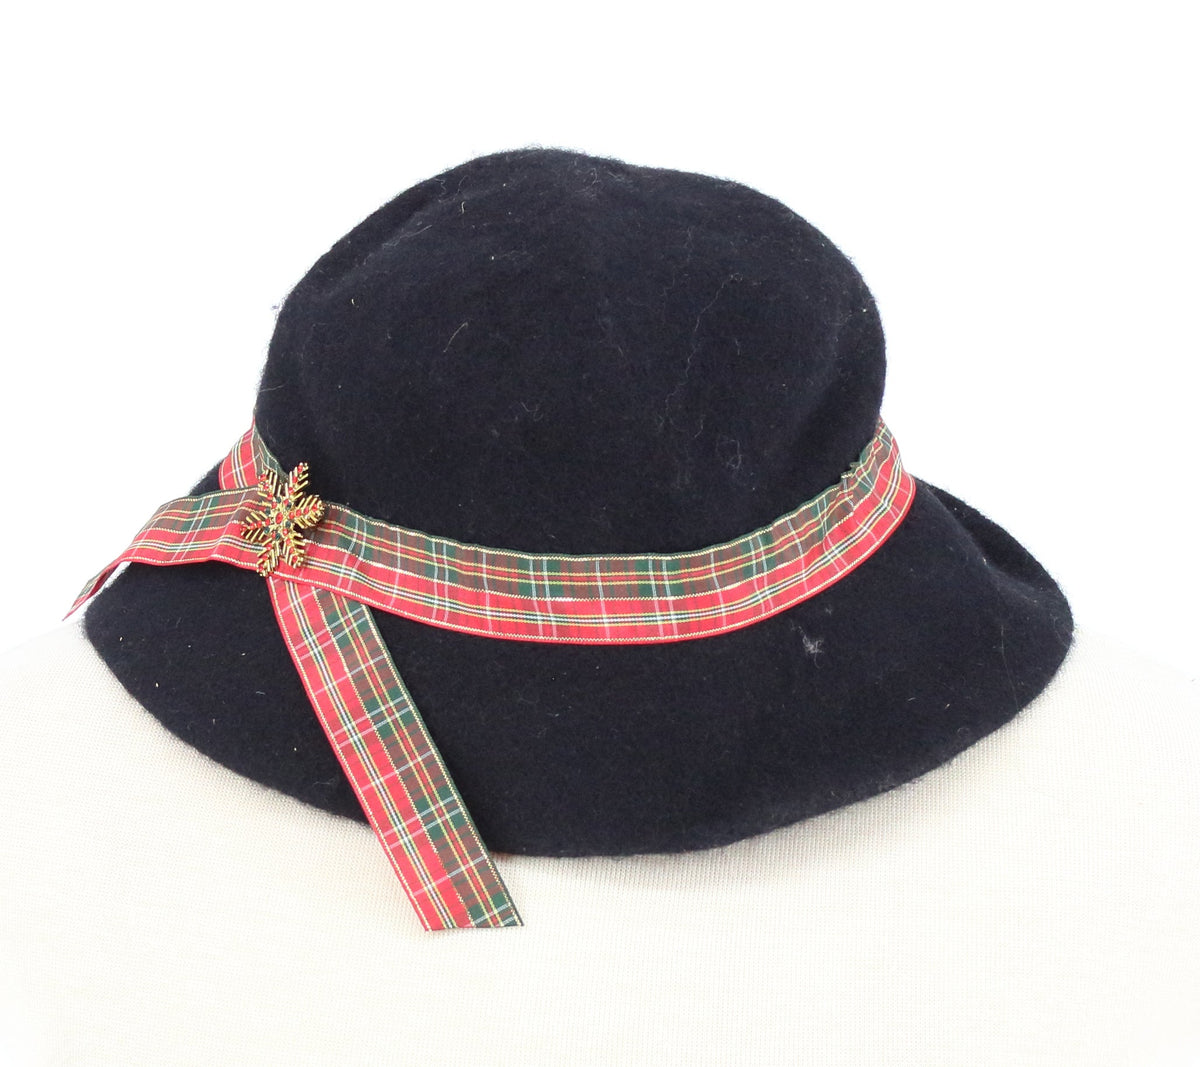 MIXIT Black Wool Hat With Checkered Ribbon And Brooch